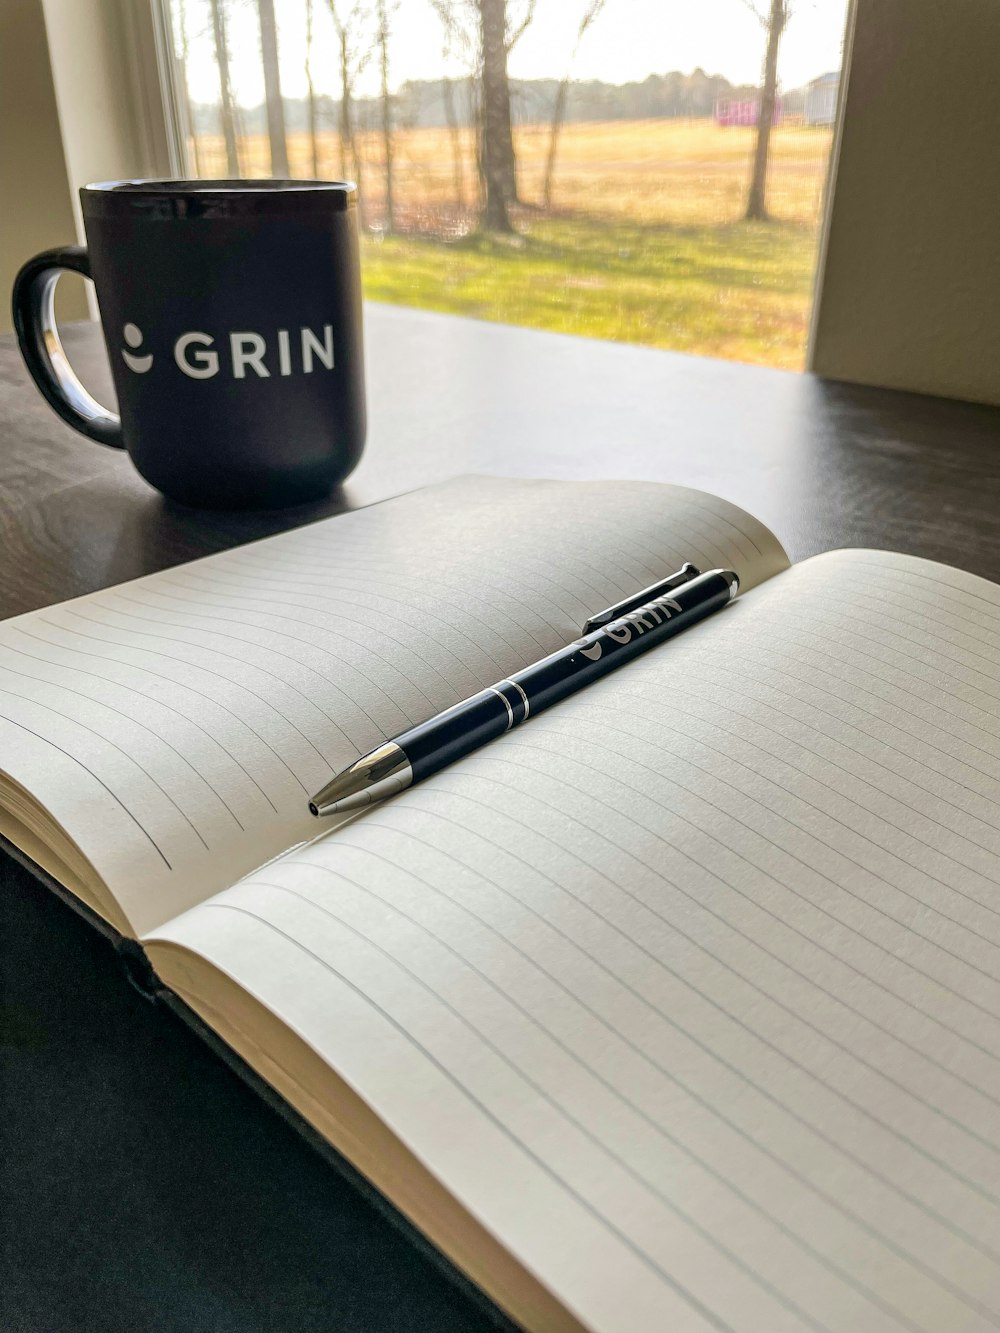 a pen and a cup on a table